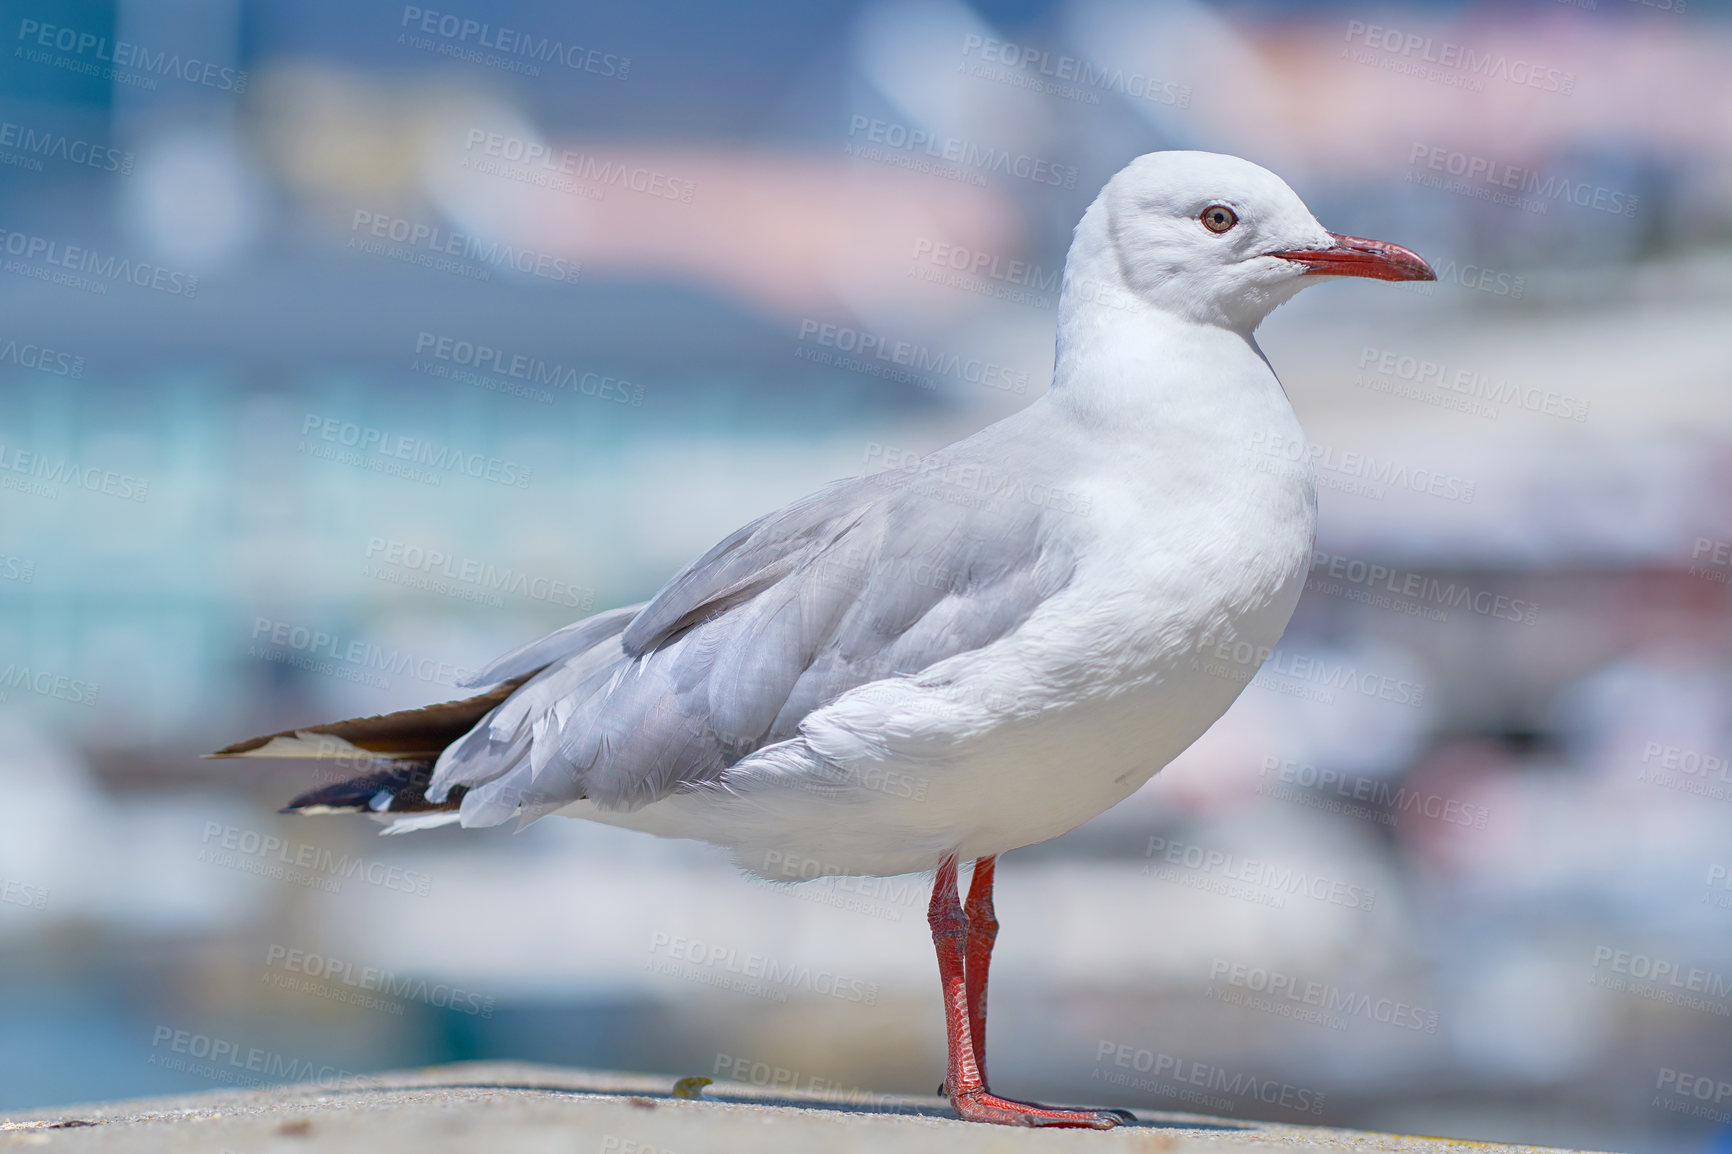 Buy stock photo A red billed gull standing on a city dock against a blurred background with copy space. Closeup birdwatching of a white, grey seagull bird with beautiful feather textures near a harbor